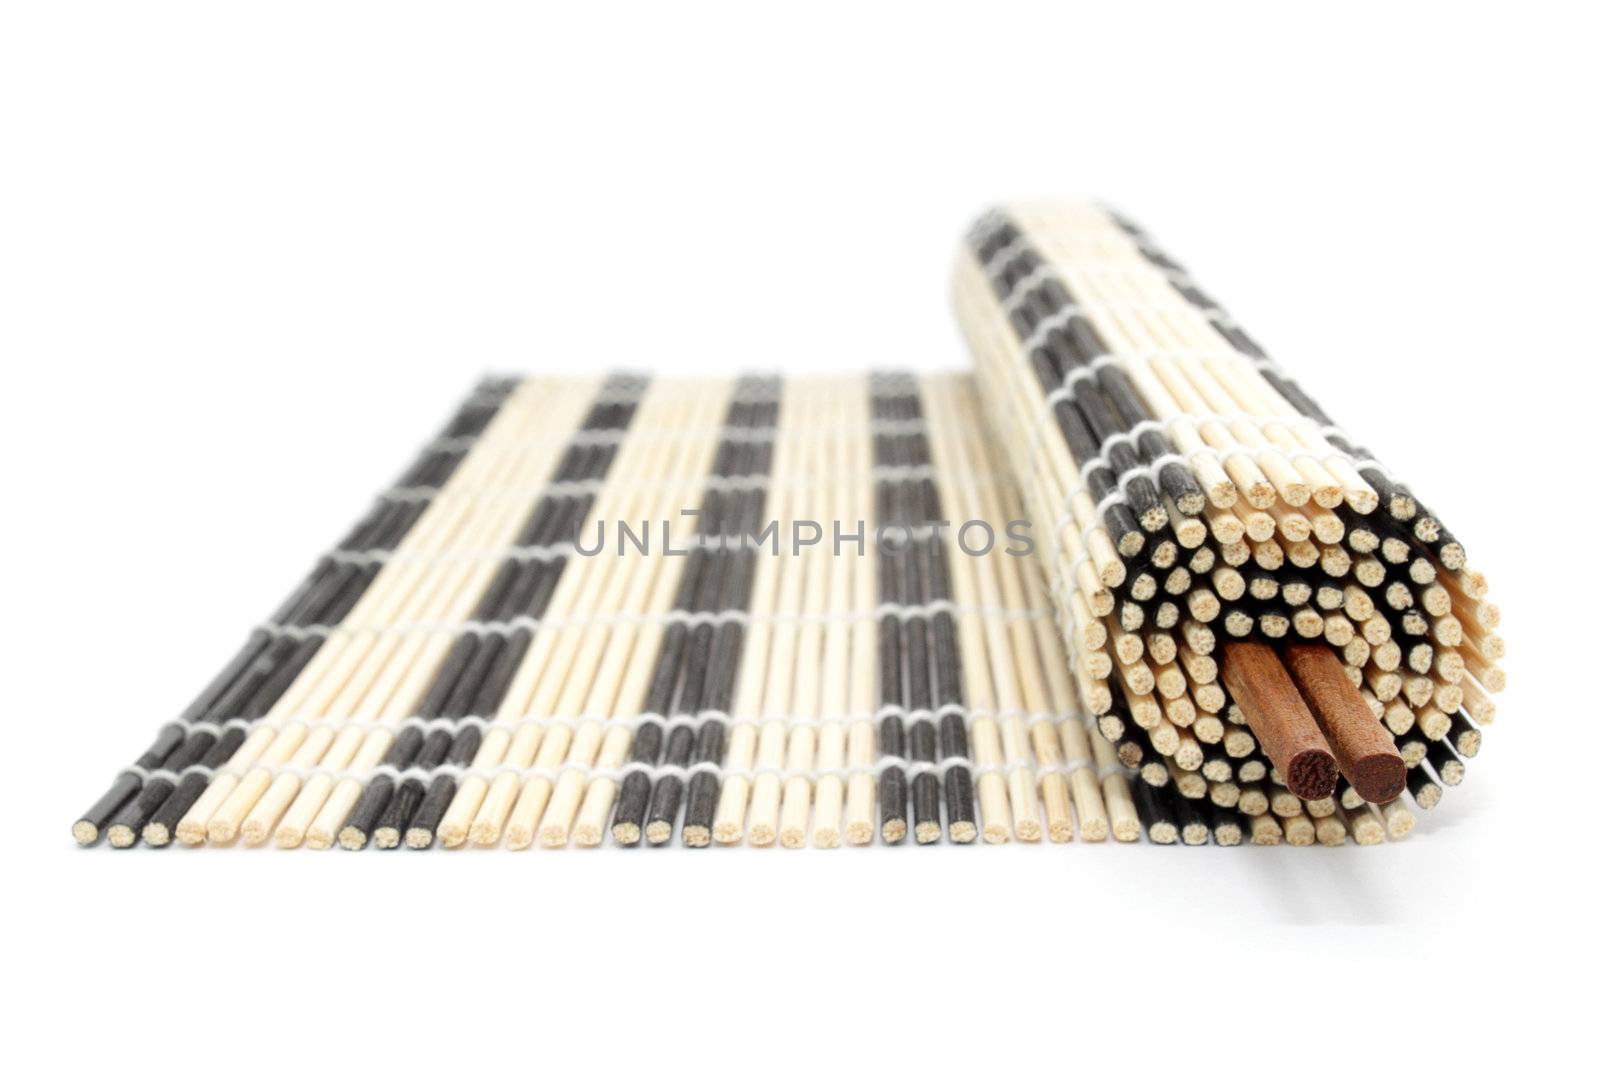 Rolled bamboo mat and a pair of chopsticks inside it isolated on white background